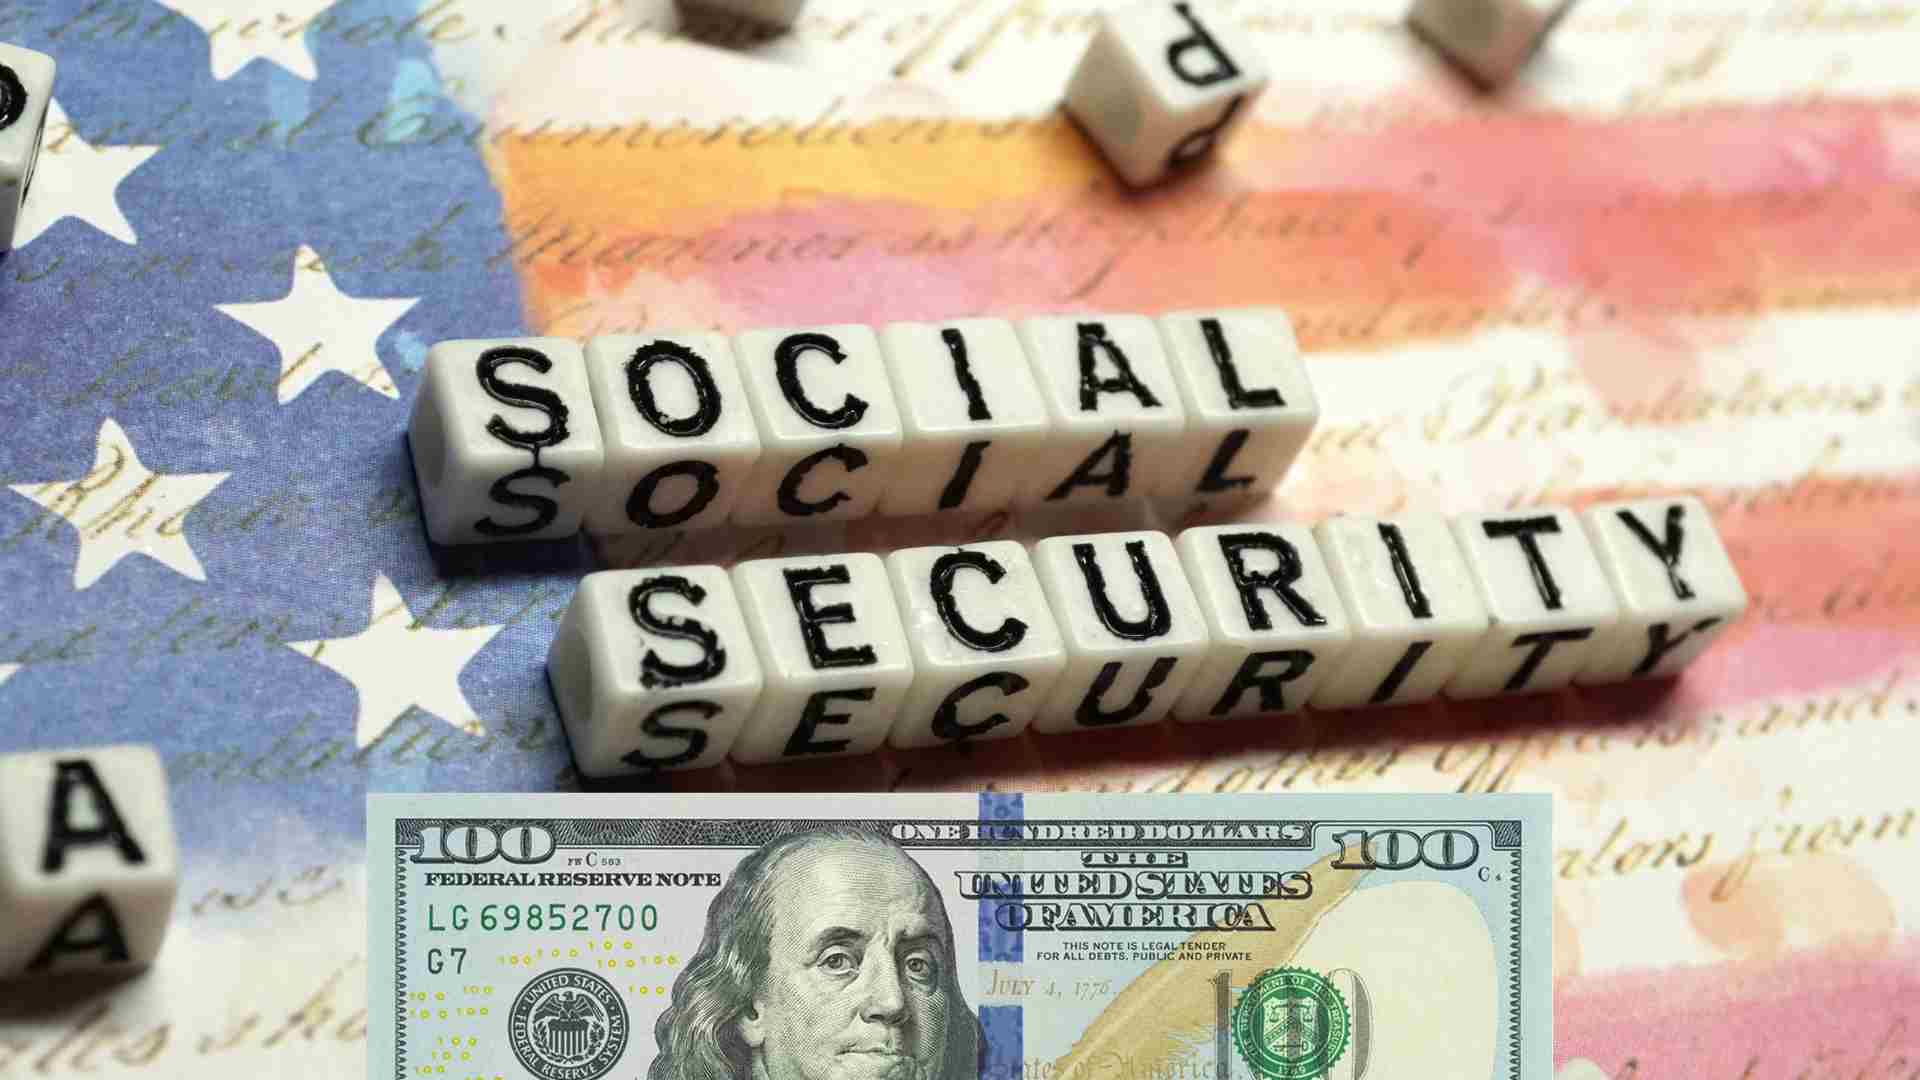 American retirees who are about 66 years old could get a huge payment from Social Security on these dates in April